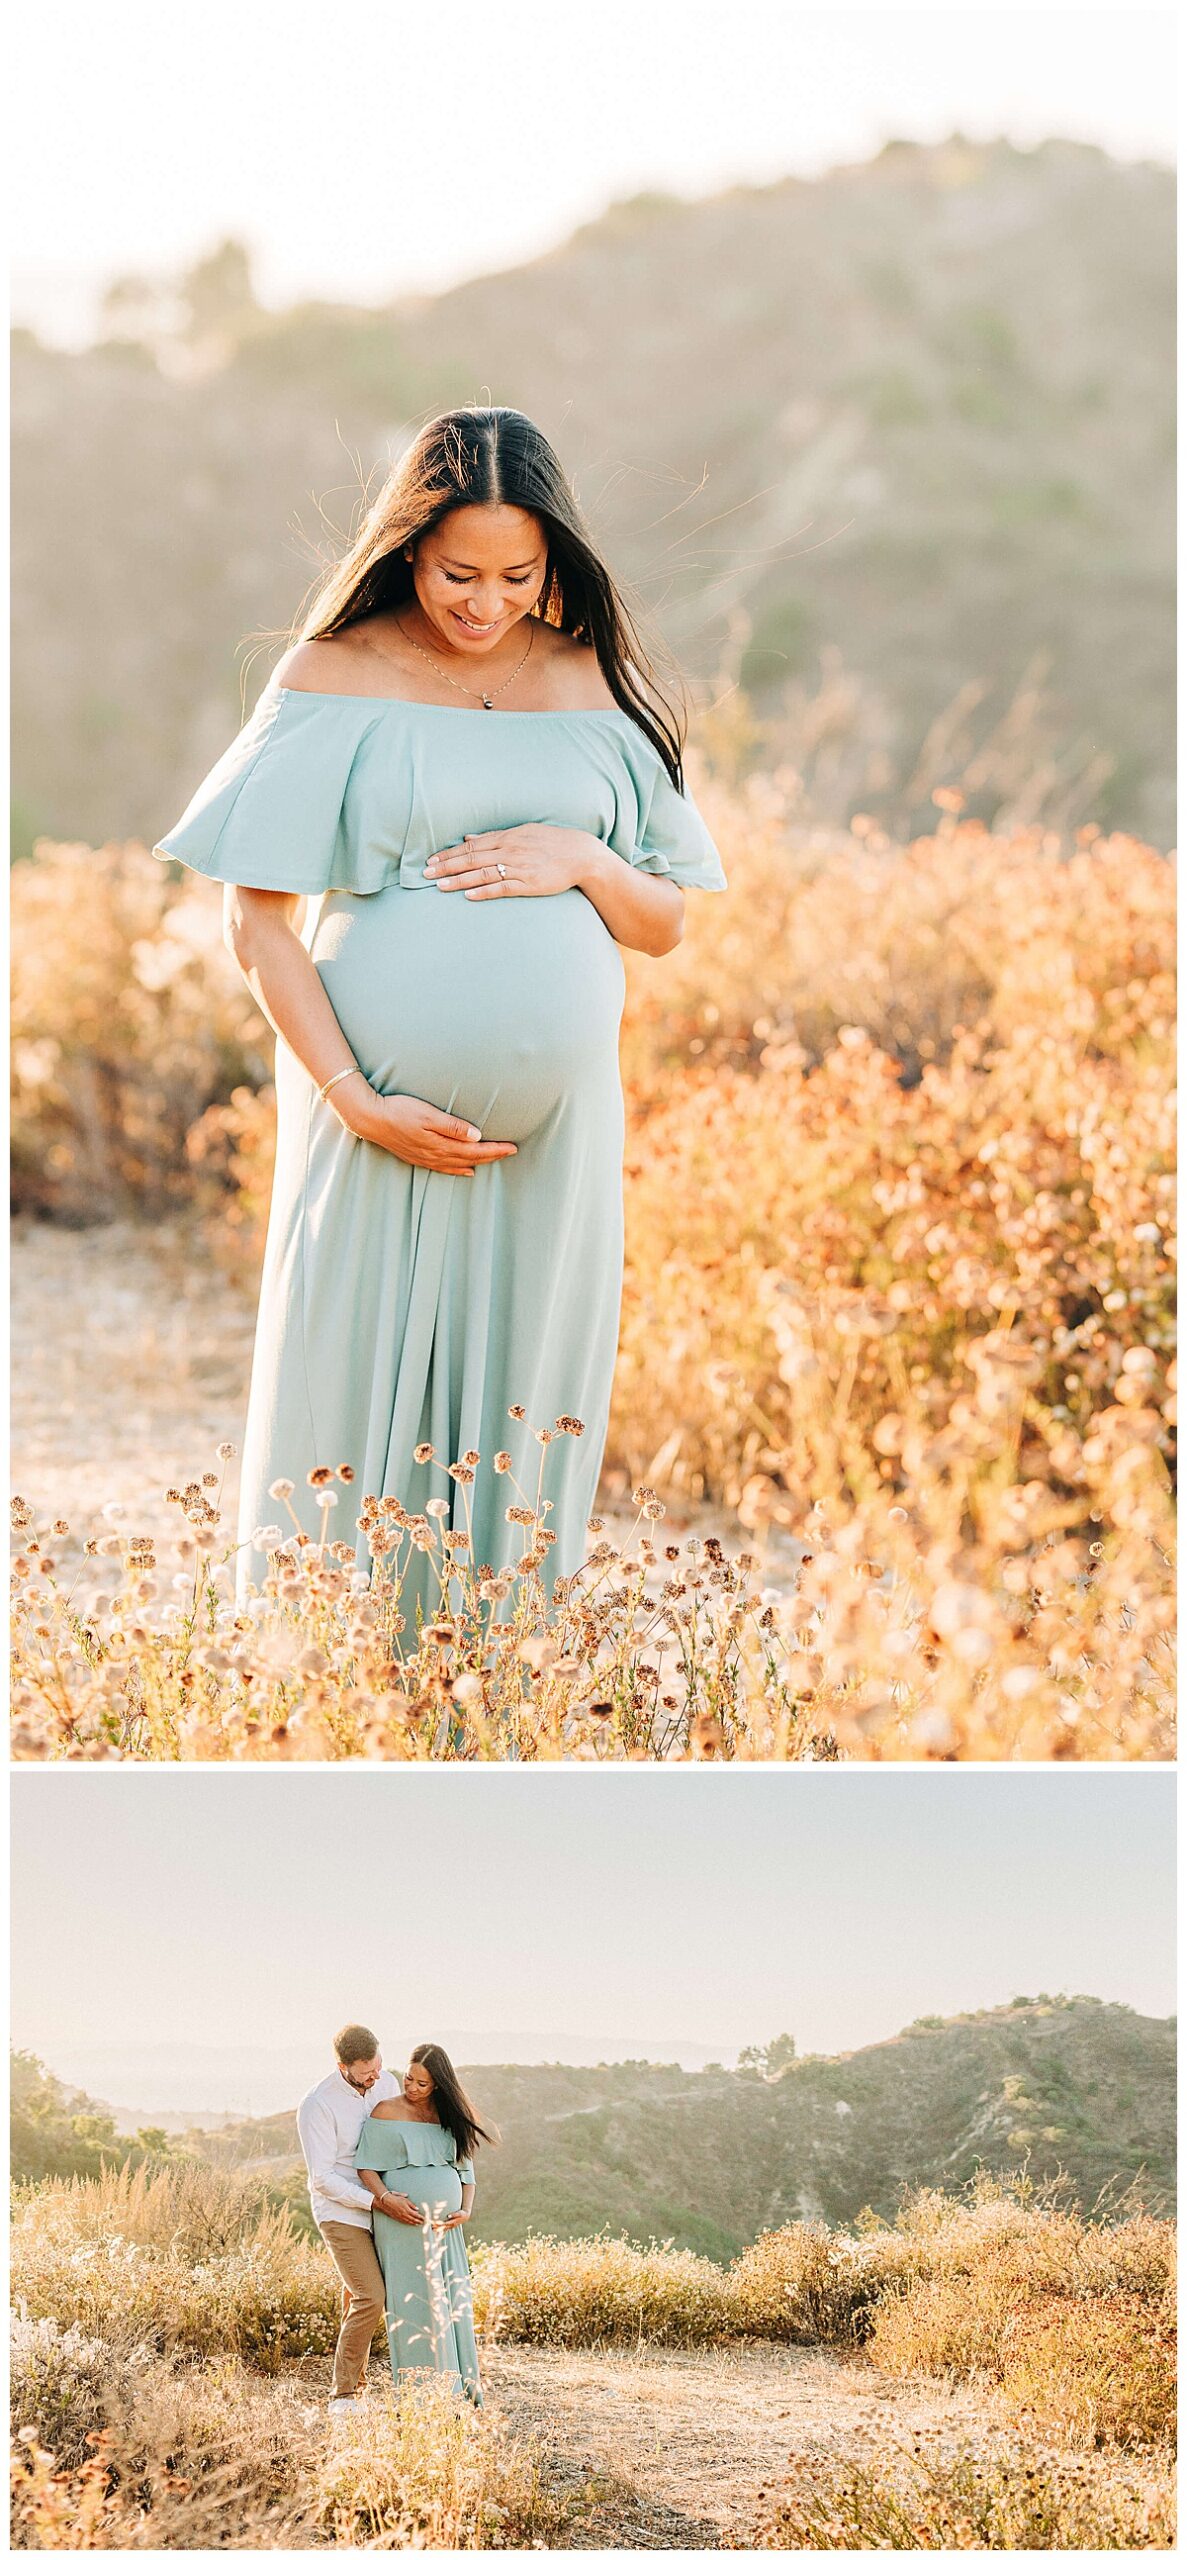 Maternity photo shoot at Coldwater Canyon park. Pregnant lady wearing a turquoise dress.